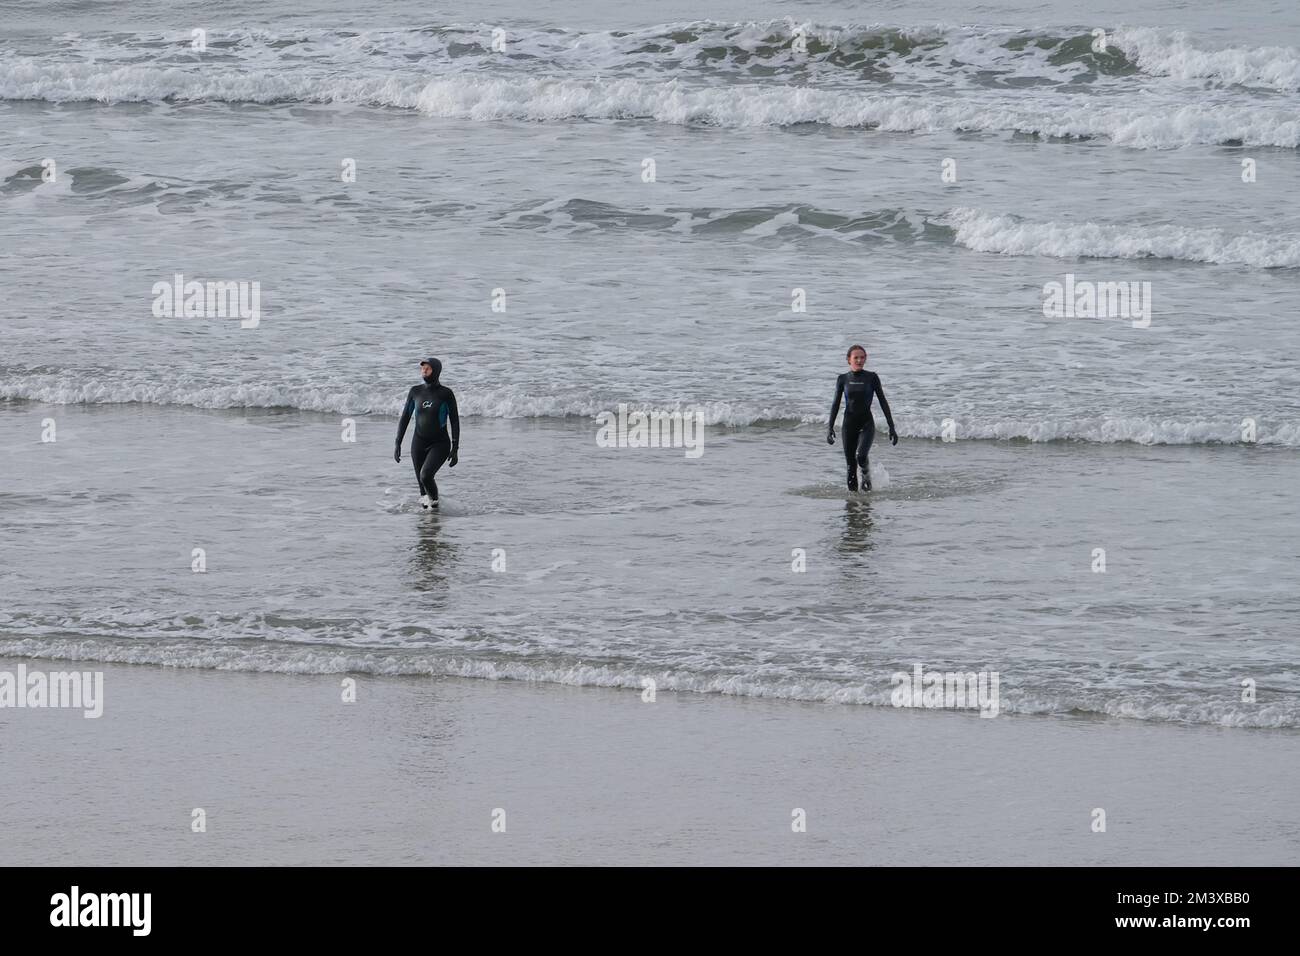 Polzeath, Cornwall, UK. 17th December 2022. UK Weather. After overnight frost again, it was a pleasant 8 degrees C on the beach at Polzeath this lunchtime.  Credit Simon Maycock / Alamy Live News. Stock Photo